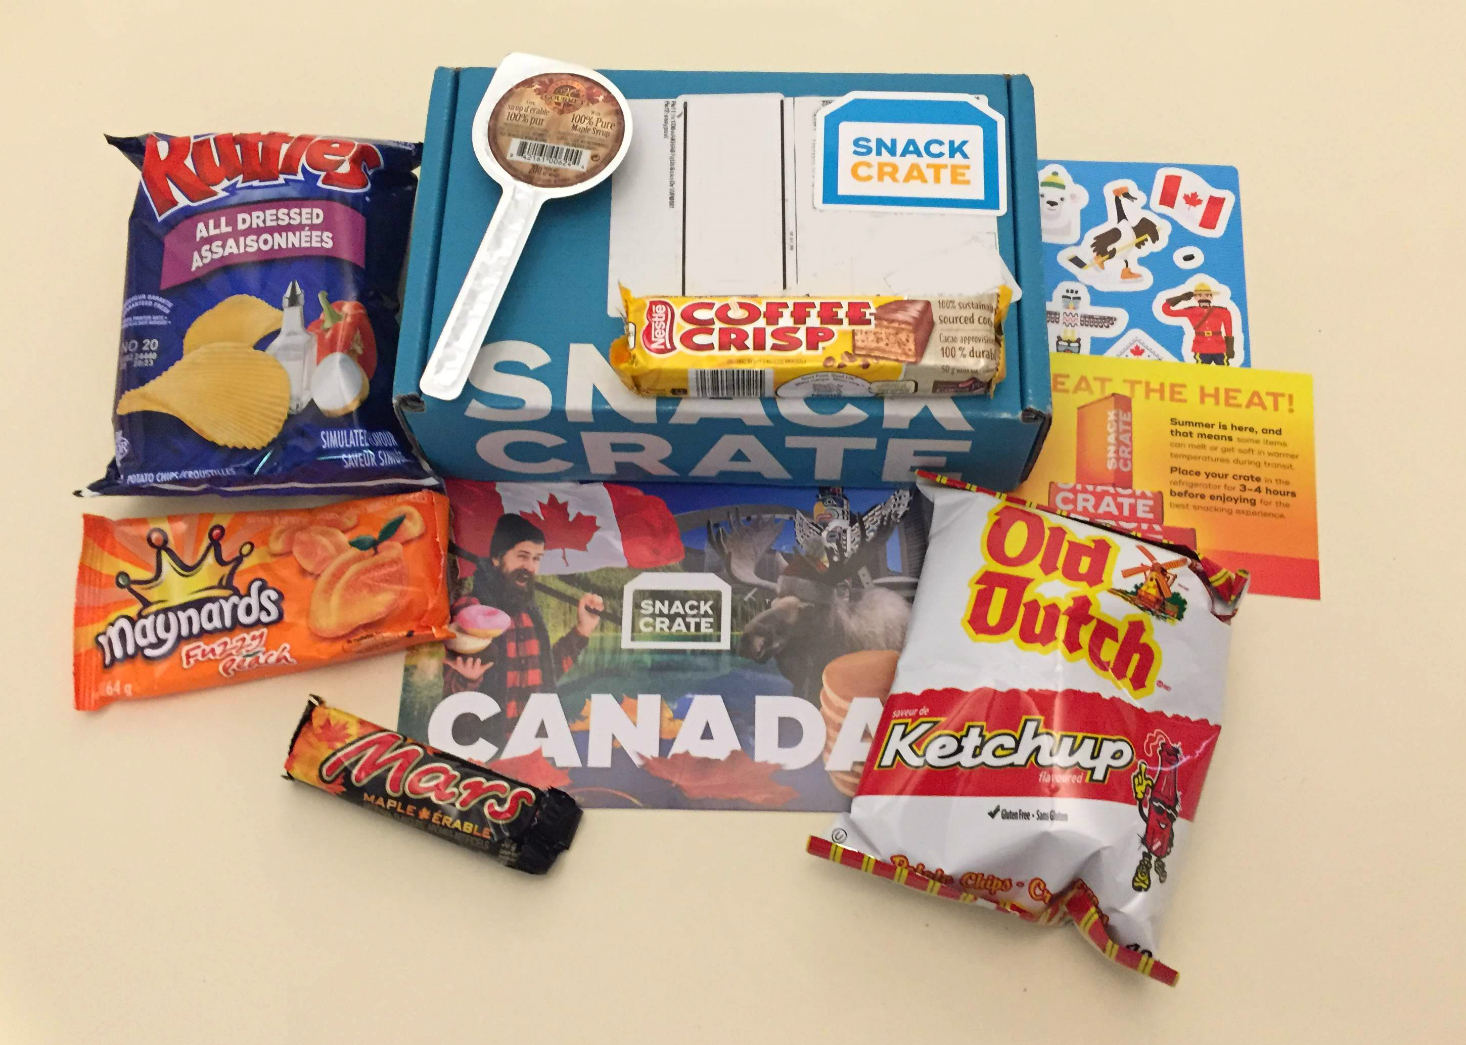 Snack Crate Subscription Box “Canada” Review + Coupon